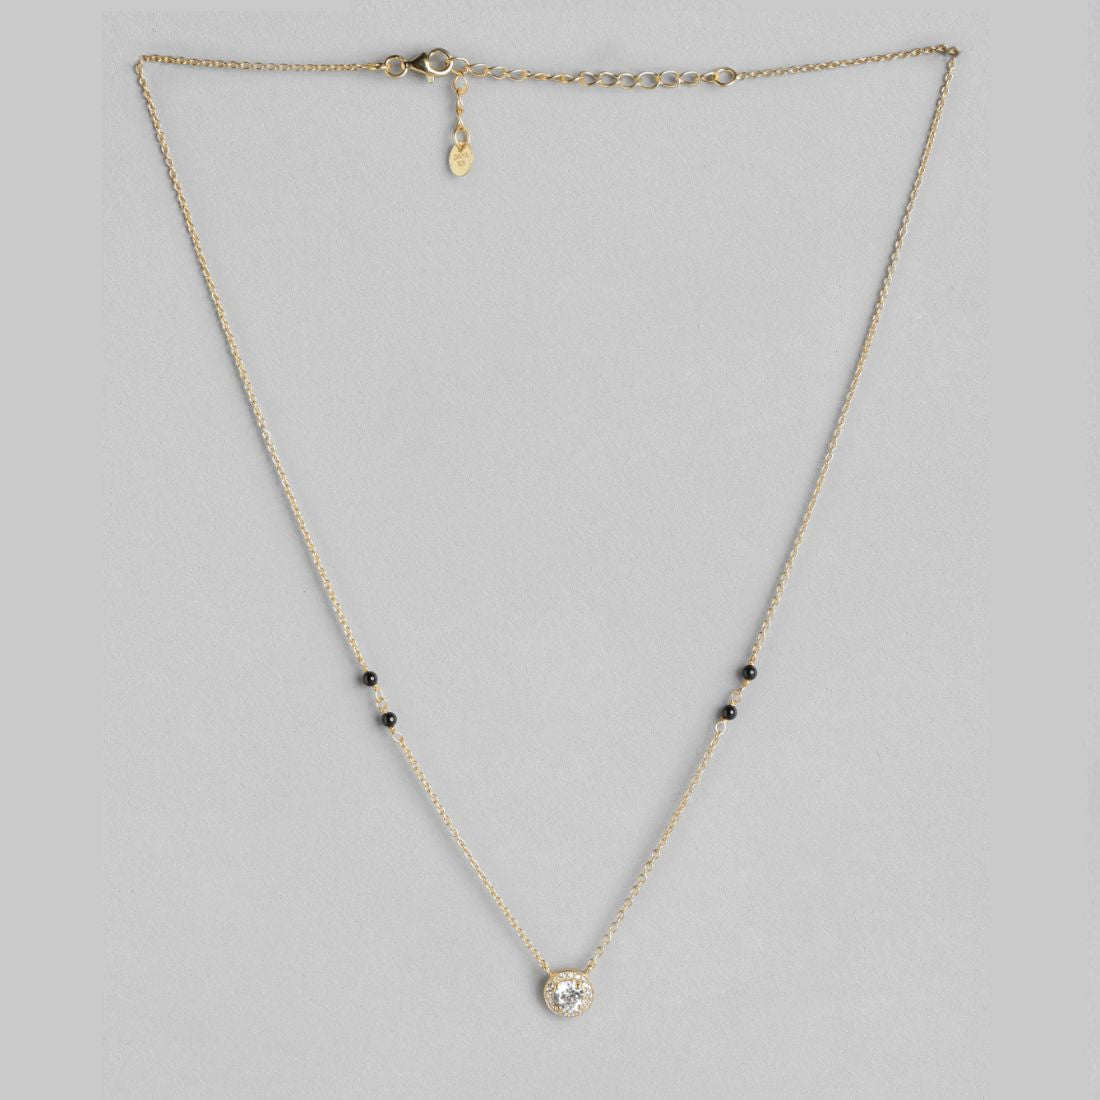 Gilded Harmony 925 Sterling Silver Gold-Plated Beaded Mangalsutra